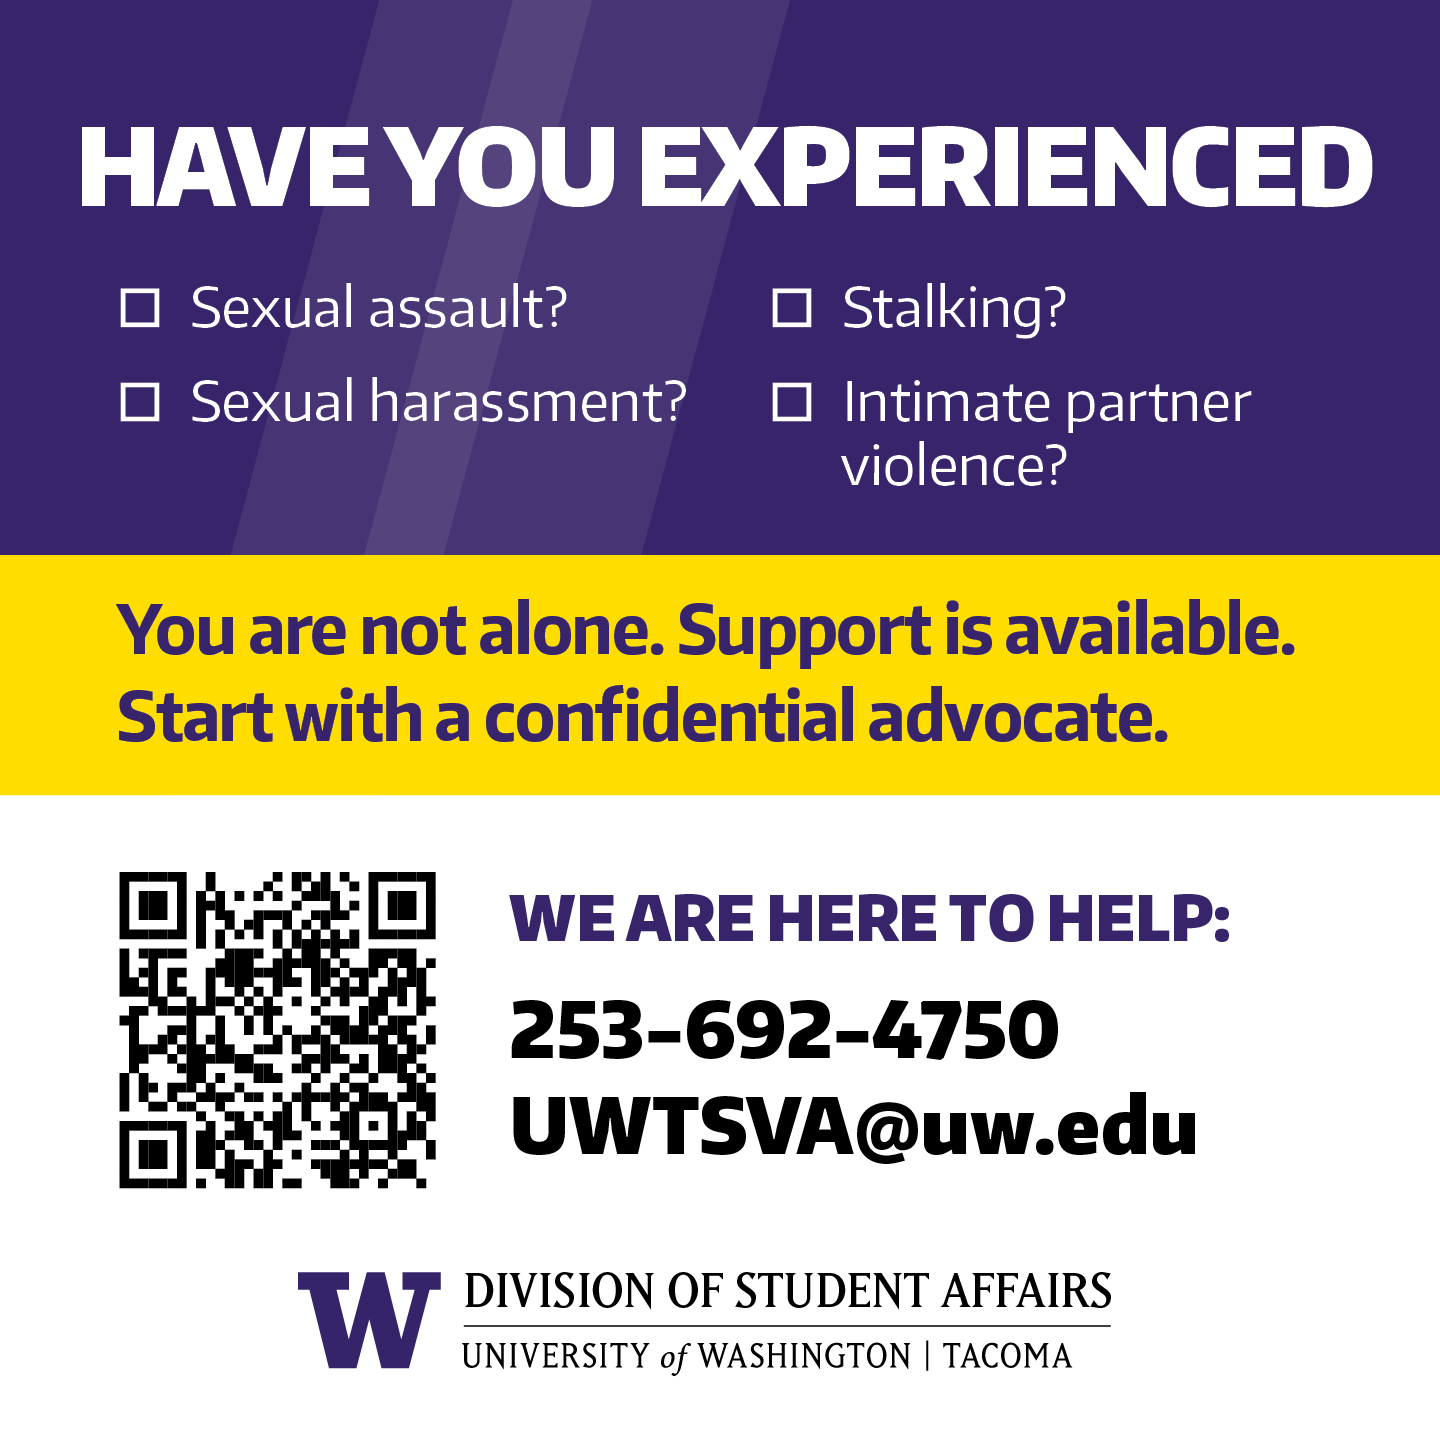 Image with sexual violence resources